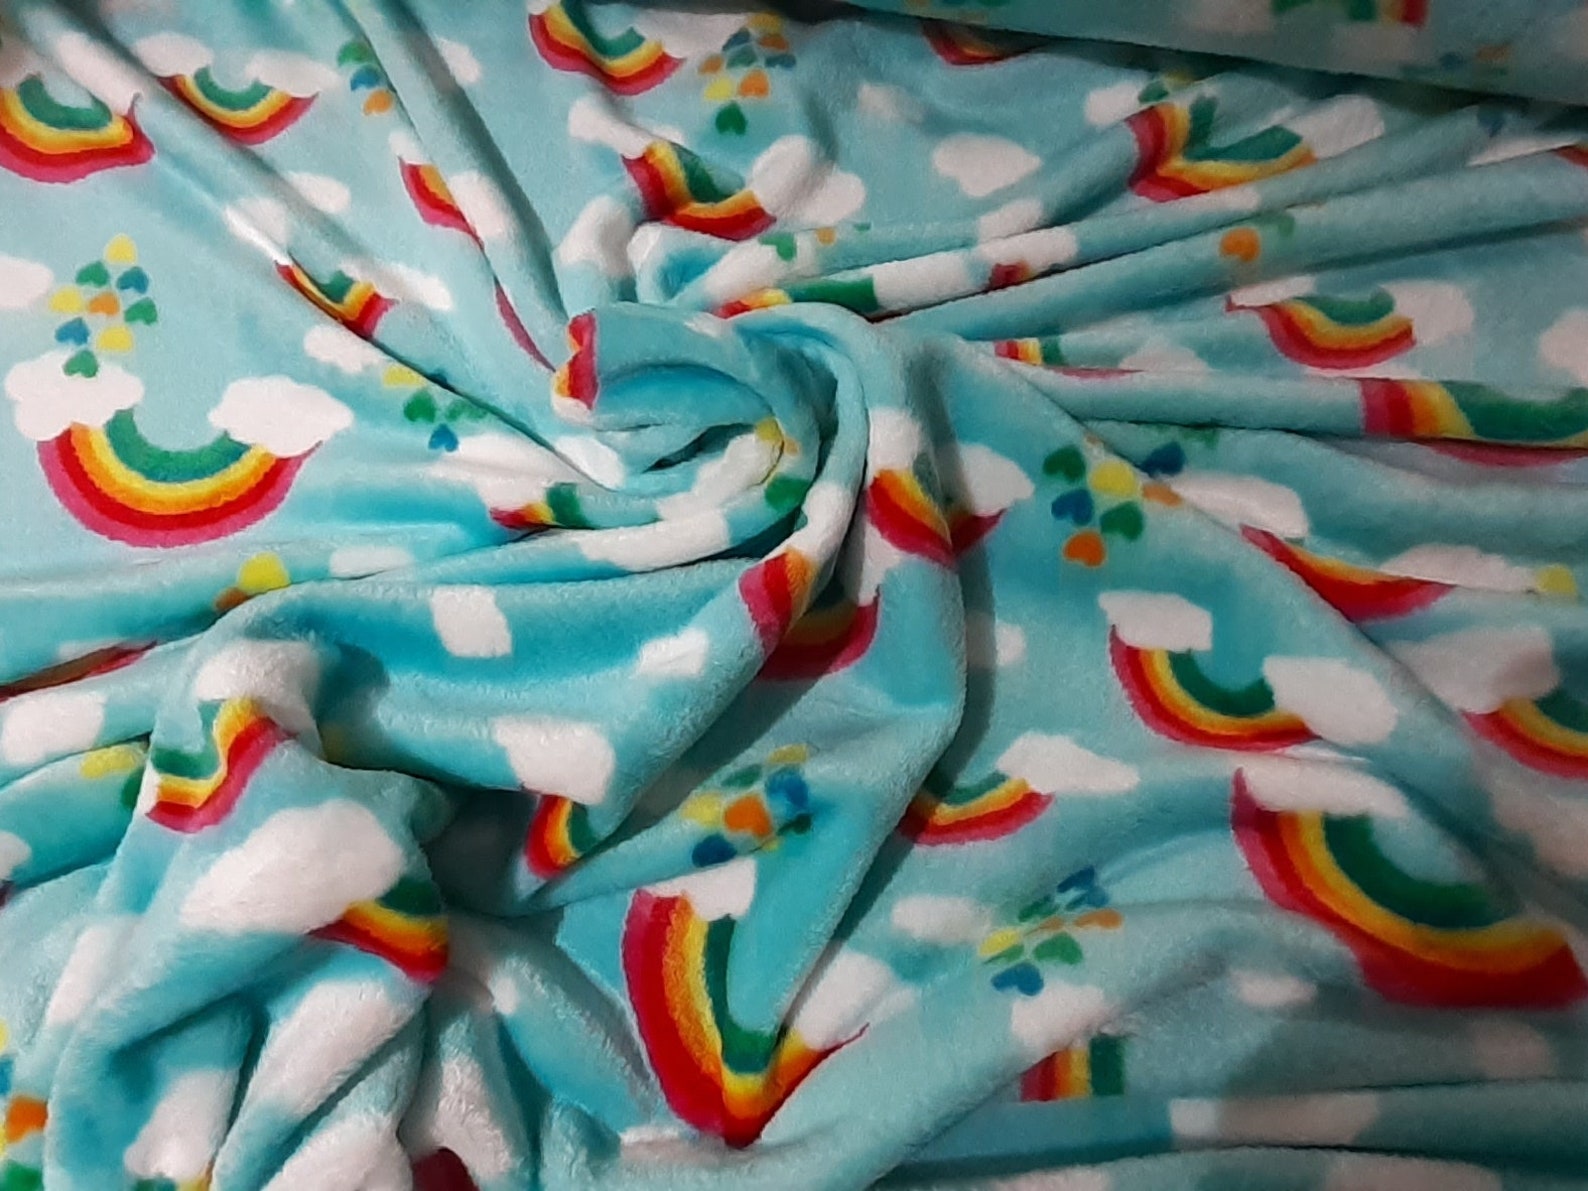 Rainbow fleece fabric spring collection for baby blanket | Etsy